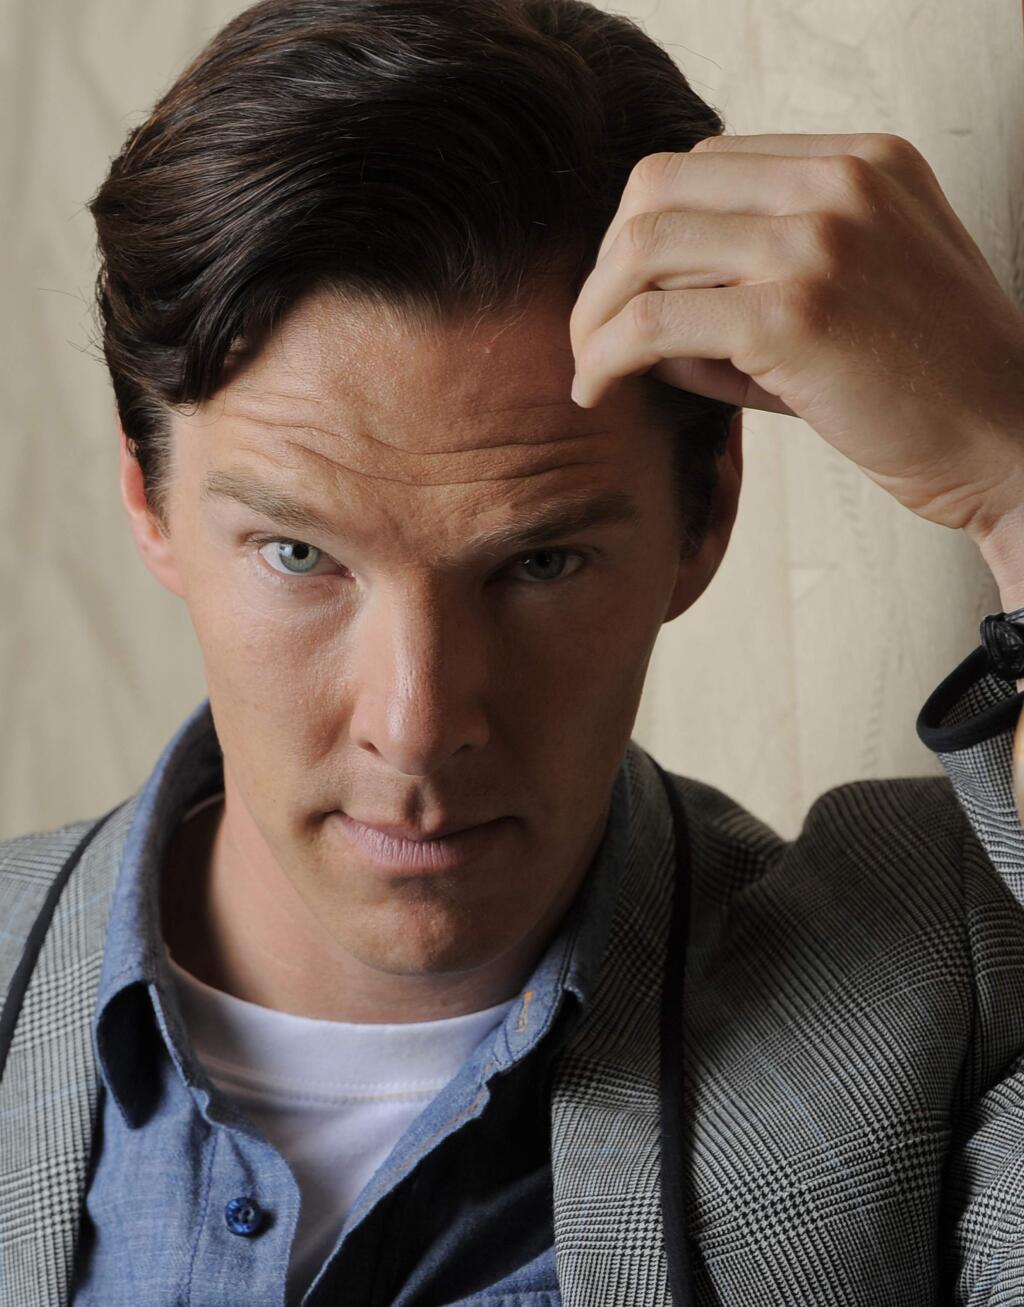 FILE - In this Sept. 8, 2013 file photo, actor Benedict Cumberbatch poses for a portrait during the 2013 Toronto International Film Festival in Toronto. Cumberbatch stars as Alan Turning, a World World II code breaker in 'The Imitation Game.' (Photo by Chris Pizzello/Invision/AP, File)